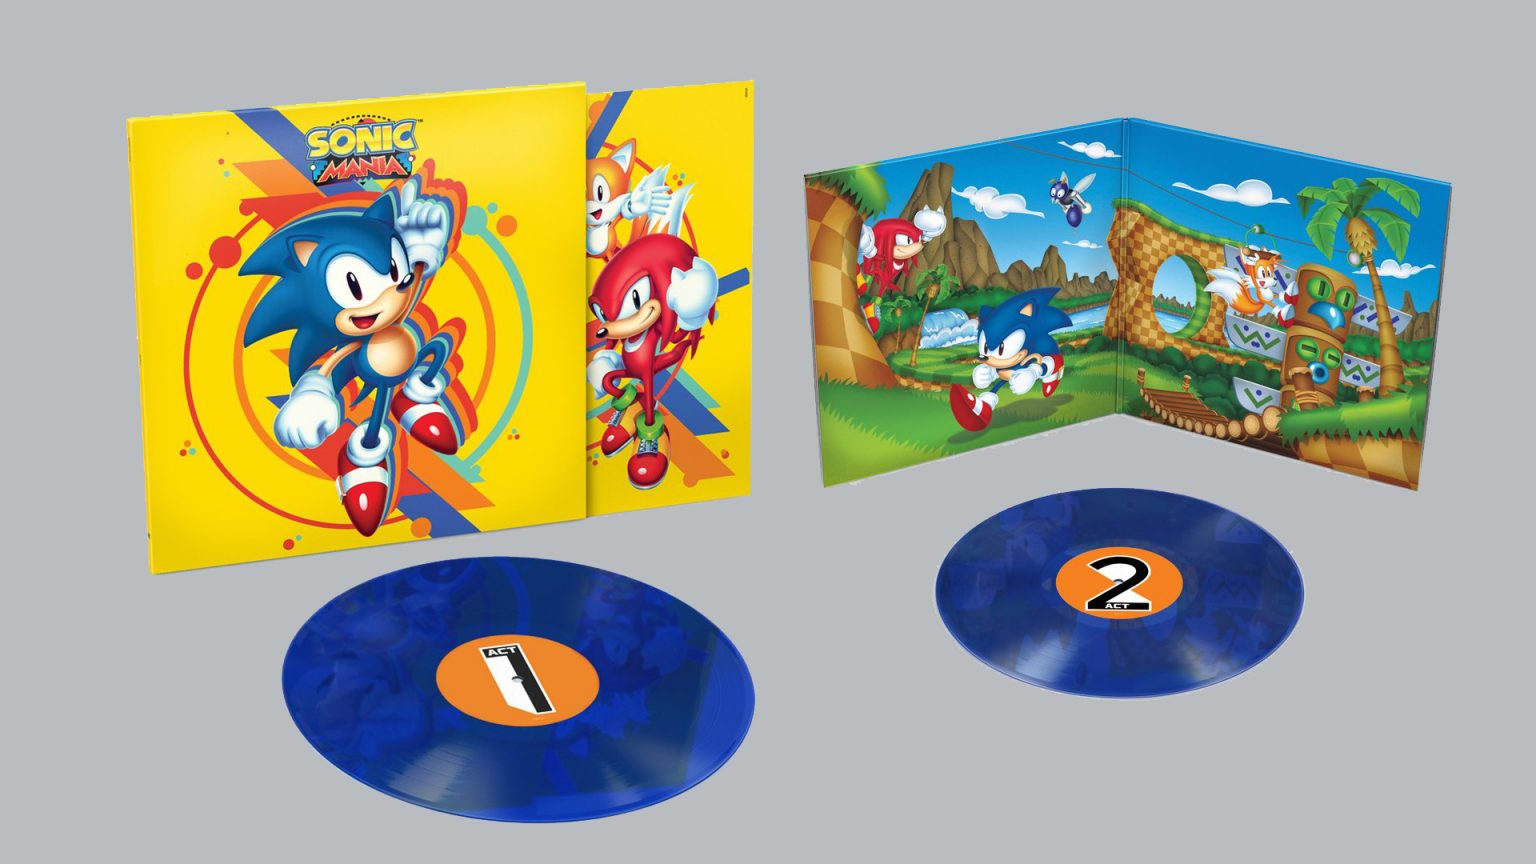 sonic mania soundtrack from steam